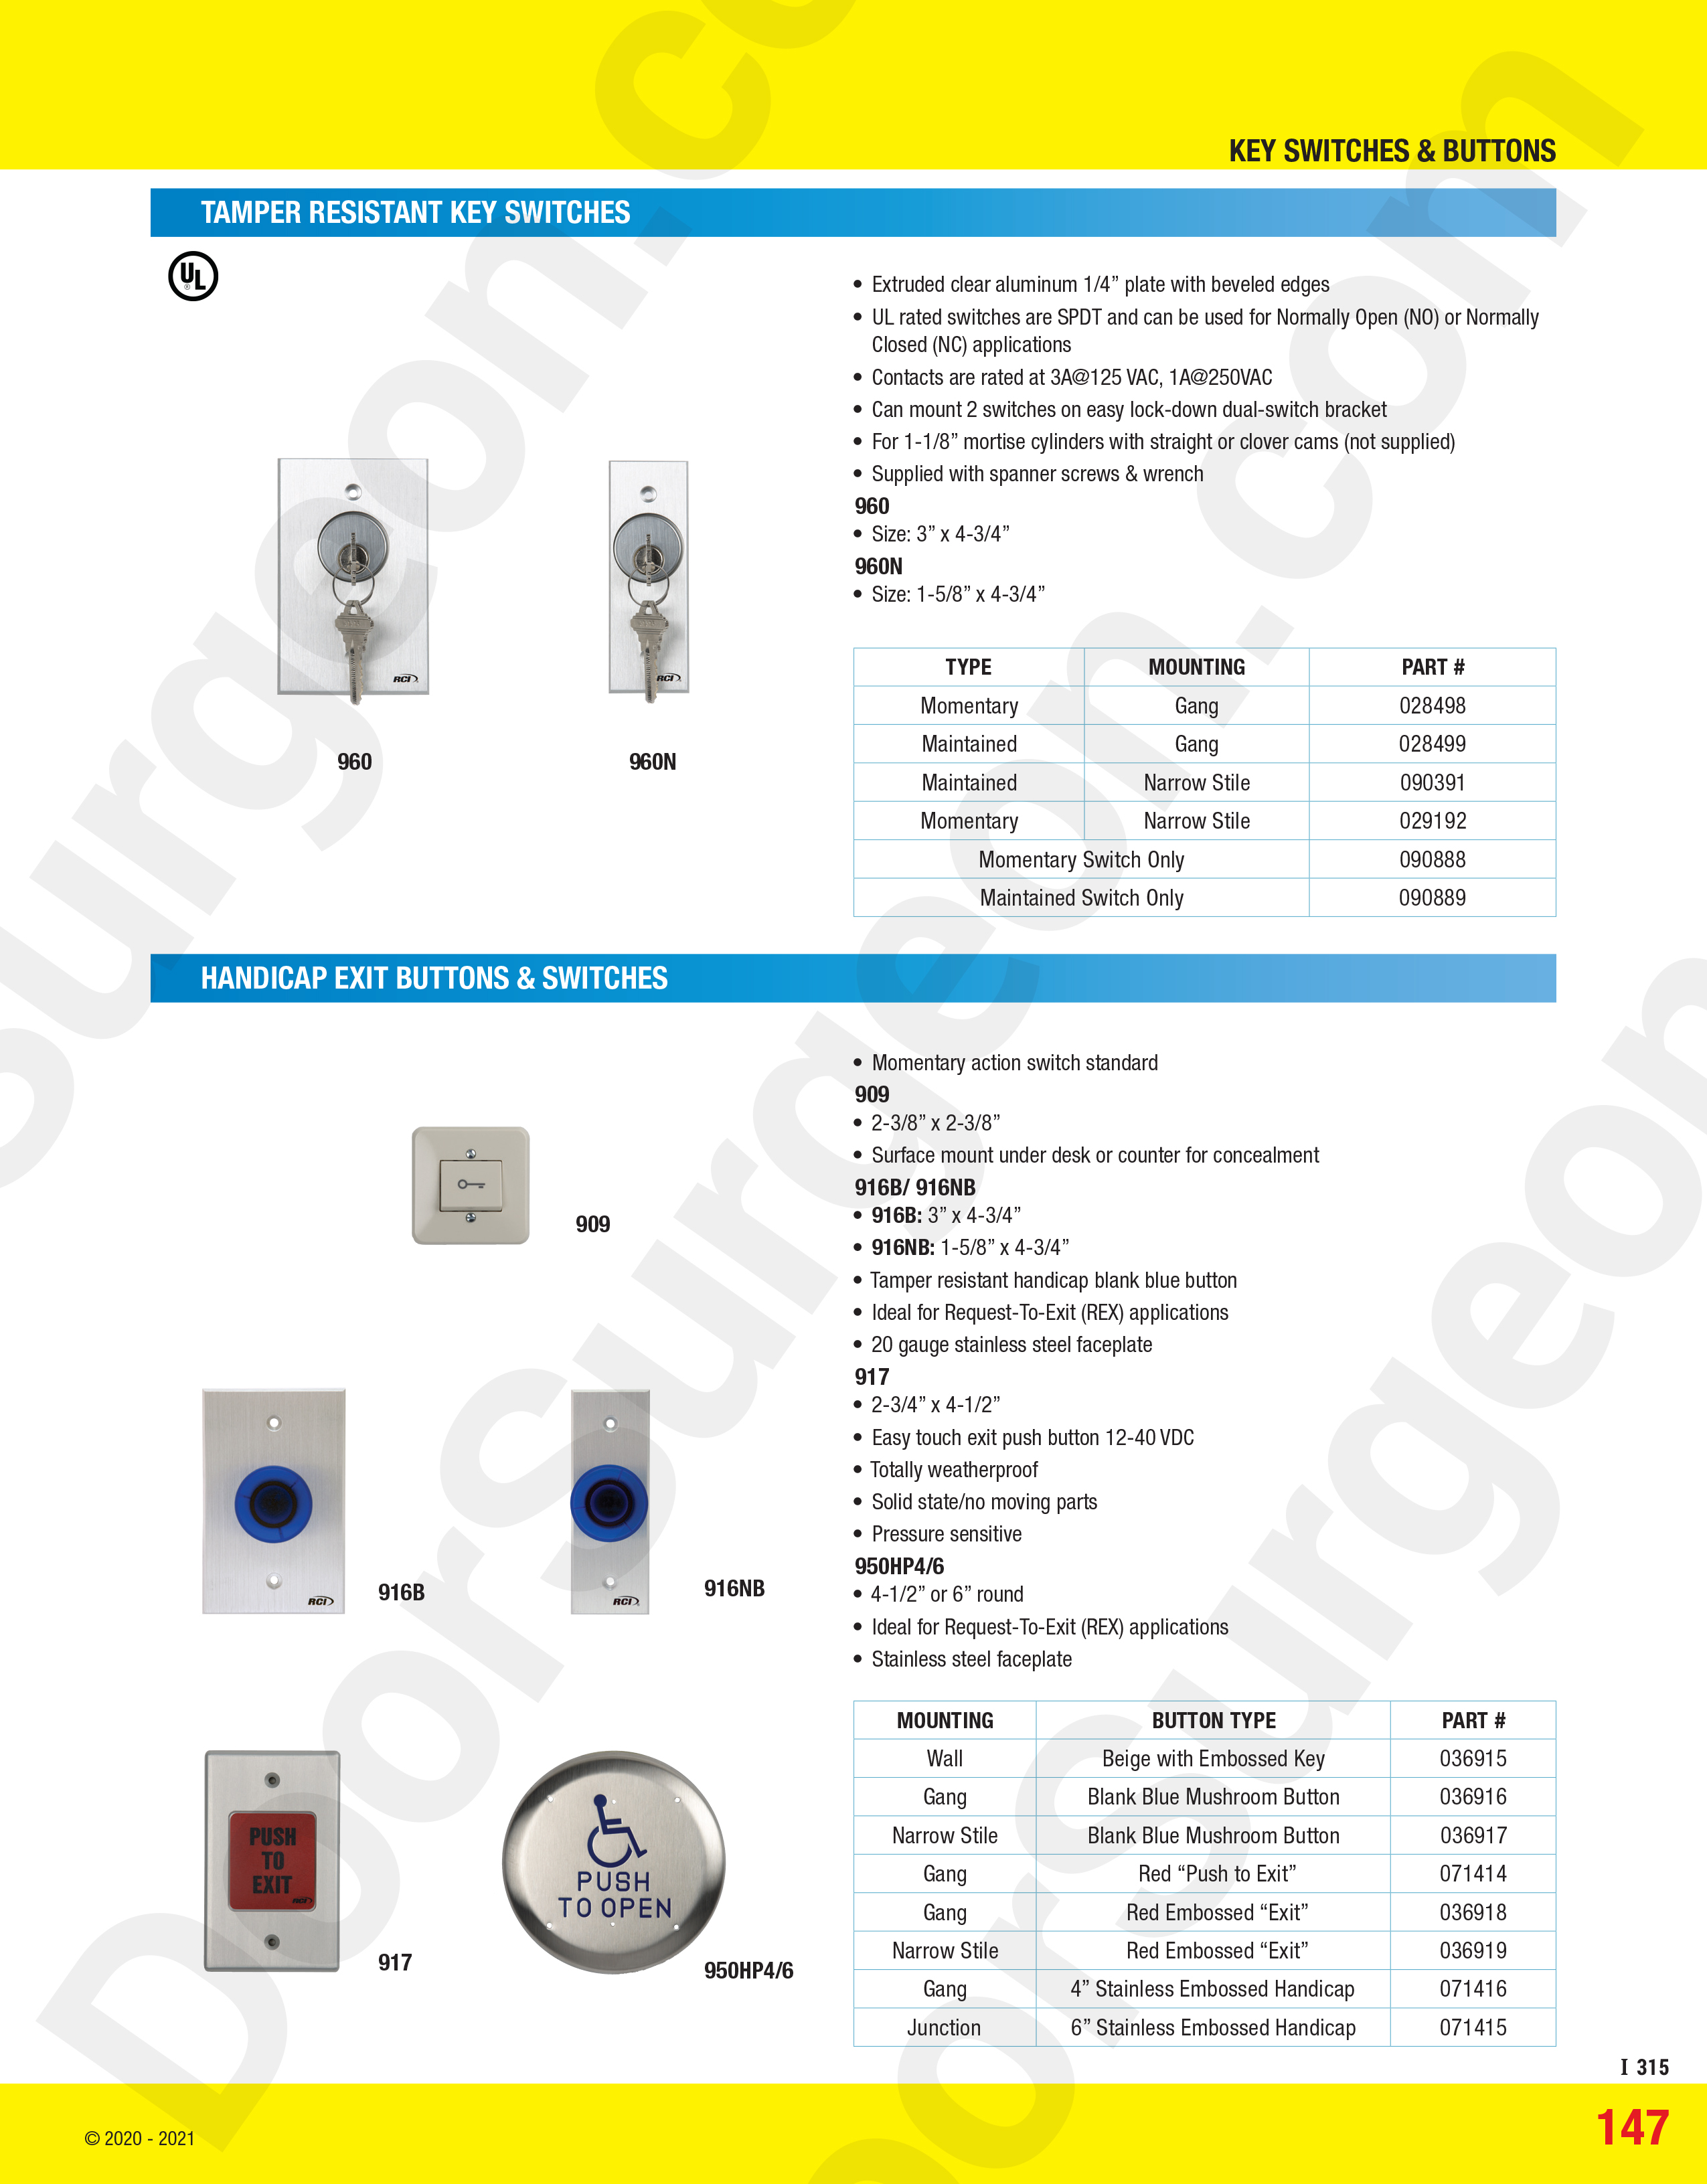 Tamper Resistant key switches, handicap exit buttons and switches